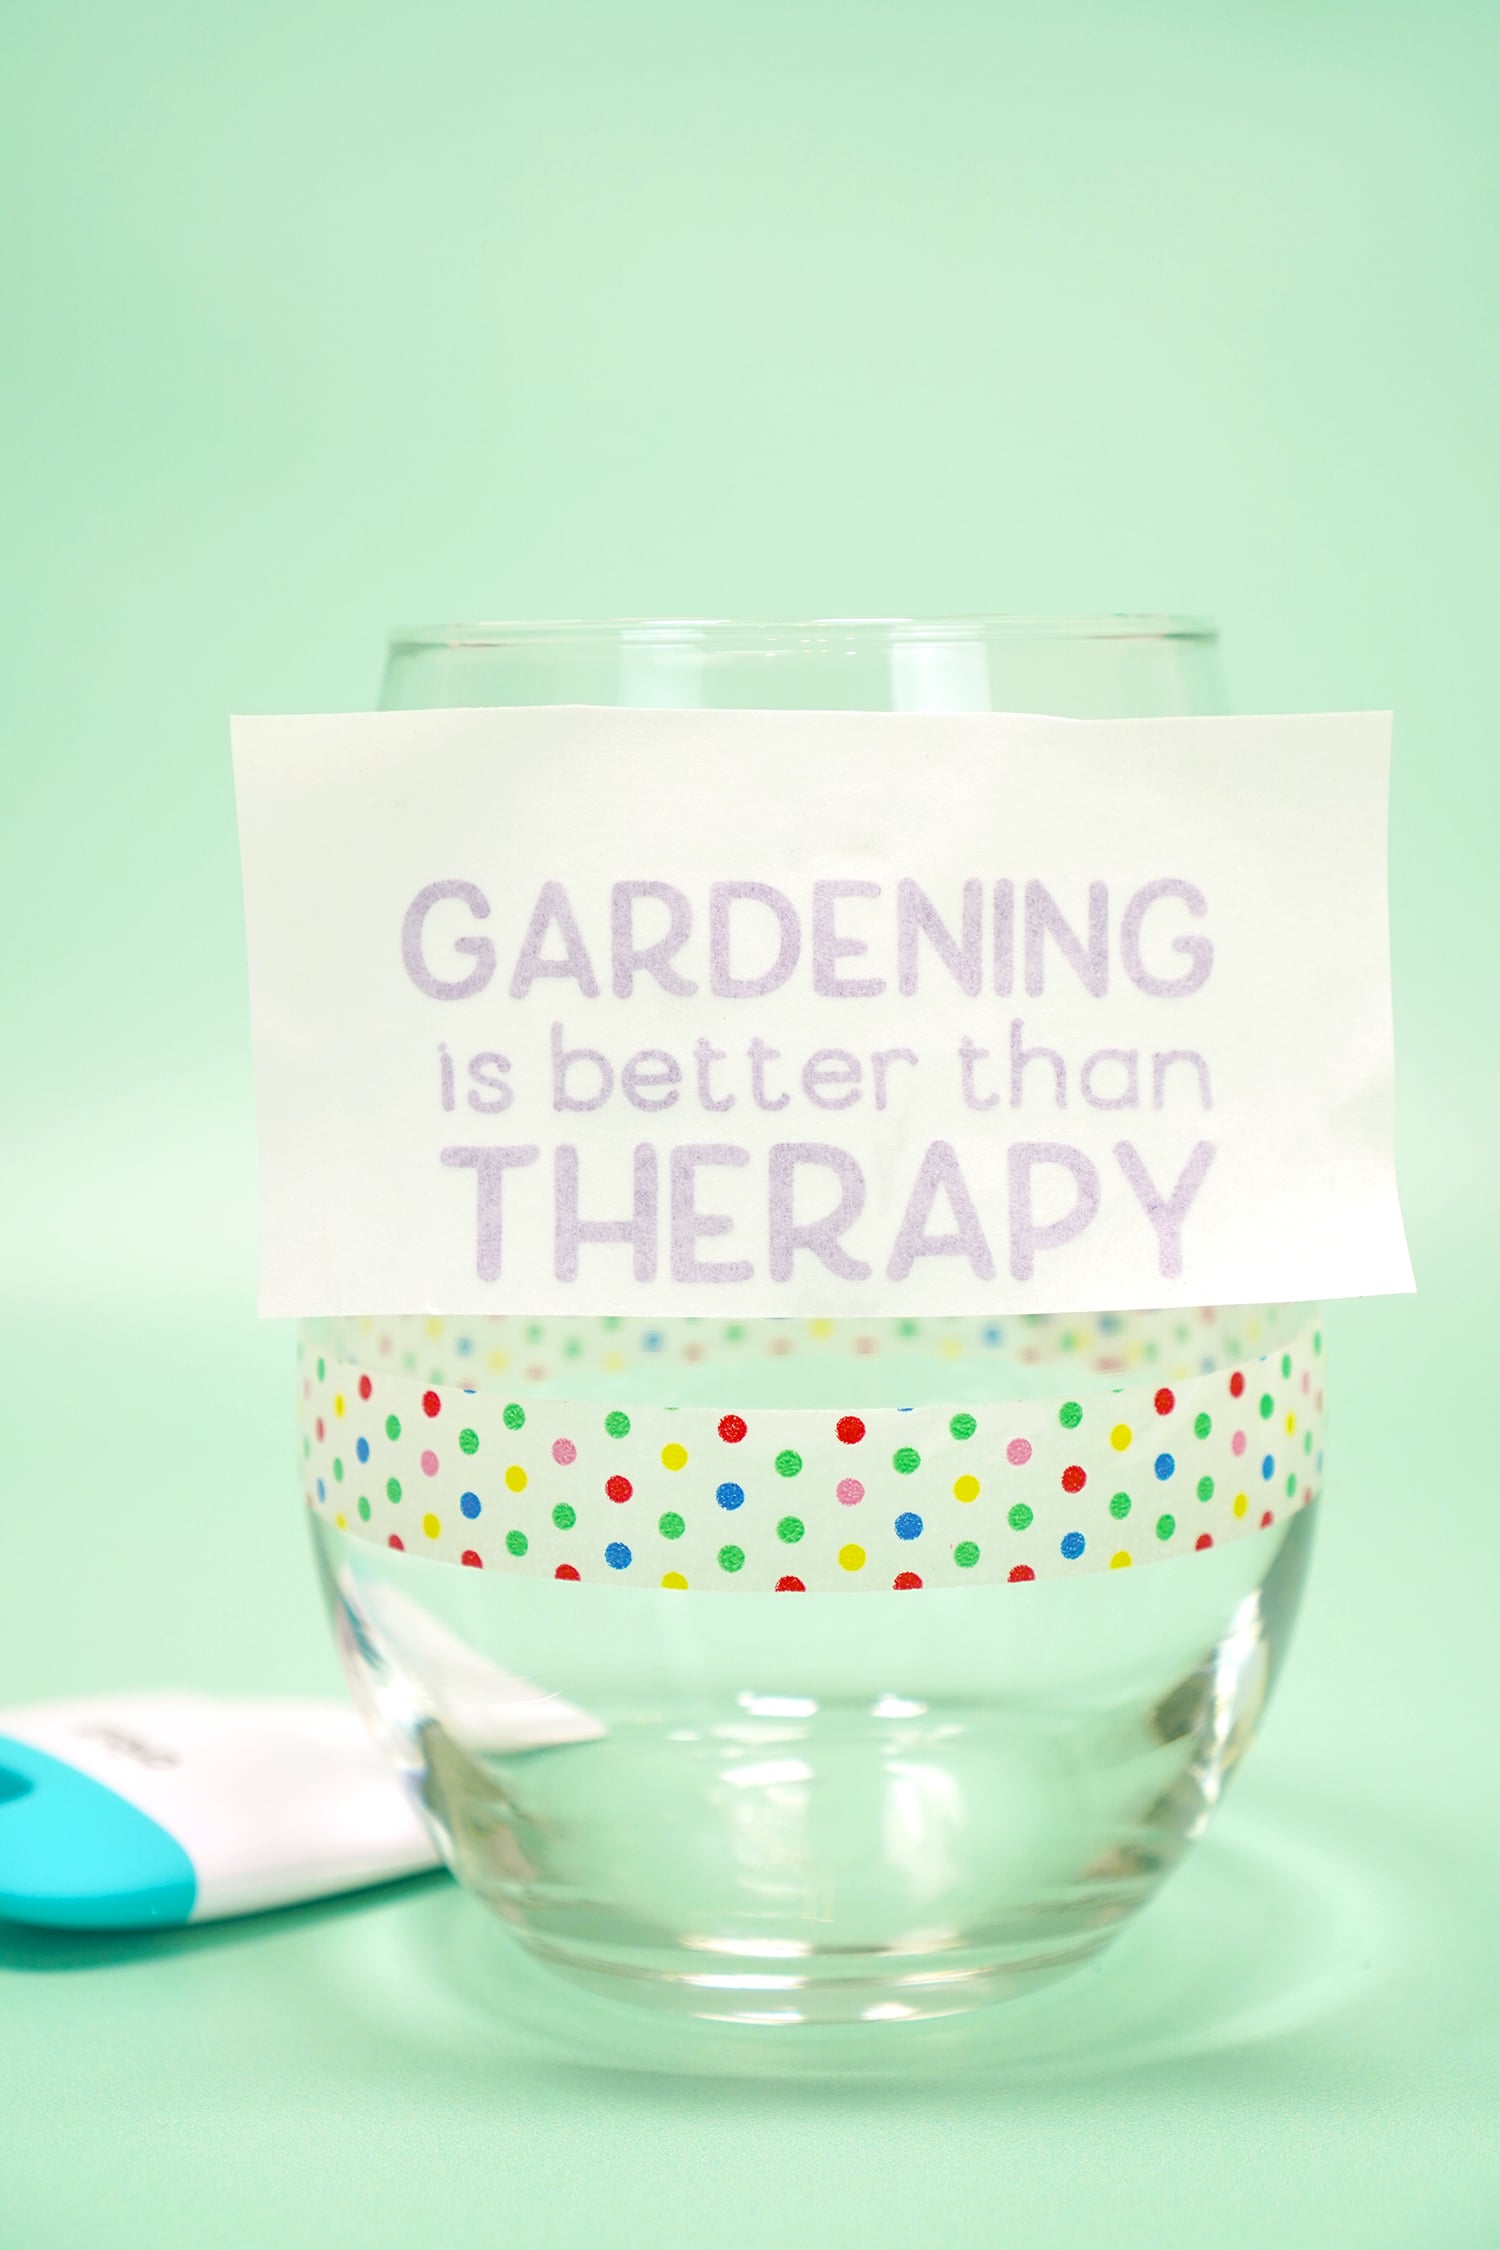 Applying "Gardening is Better Than Therapy" purple shimmer vinyl to a clear stemless wine glass on mint green background